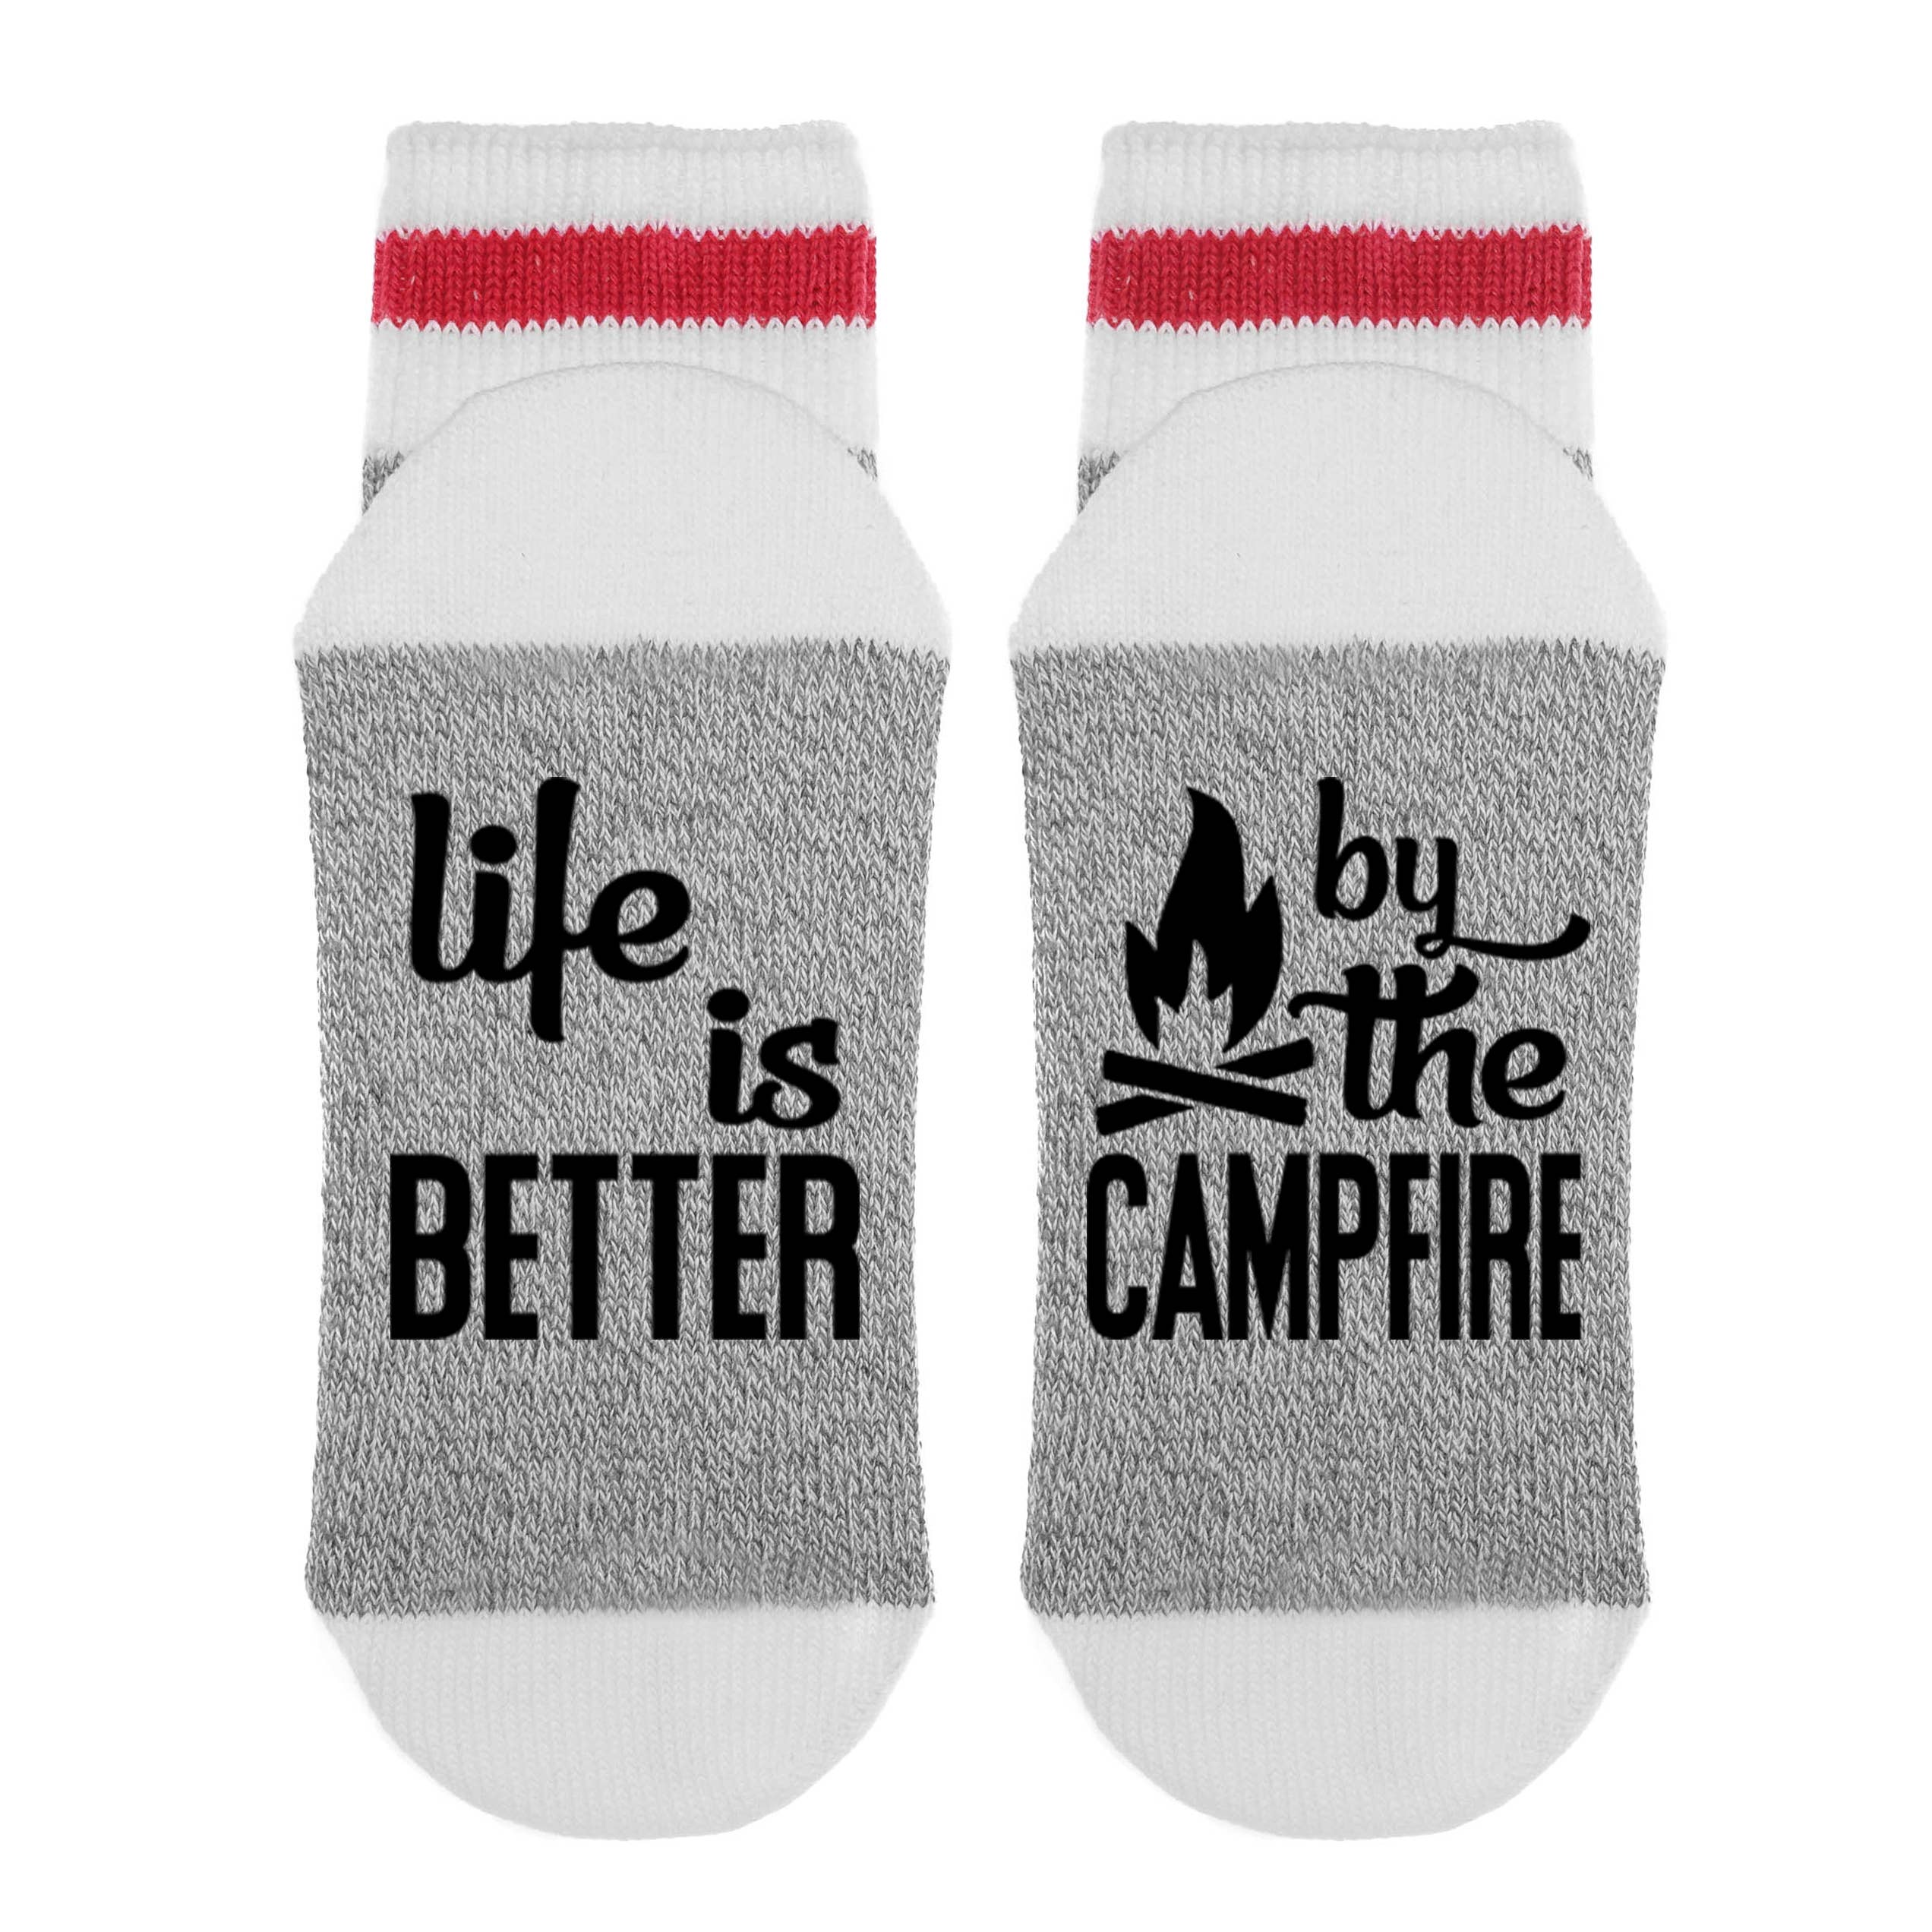 Life Is Better By The Campfire - Socks